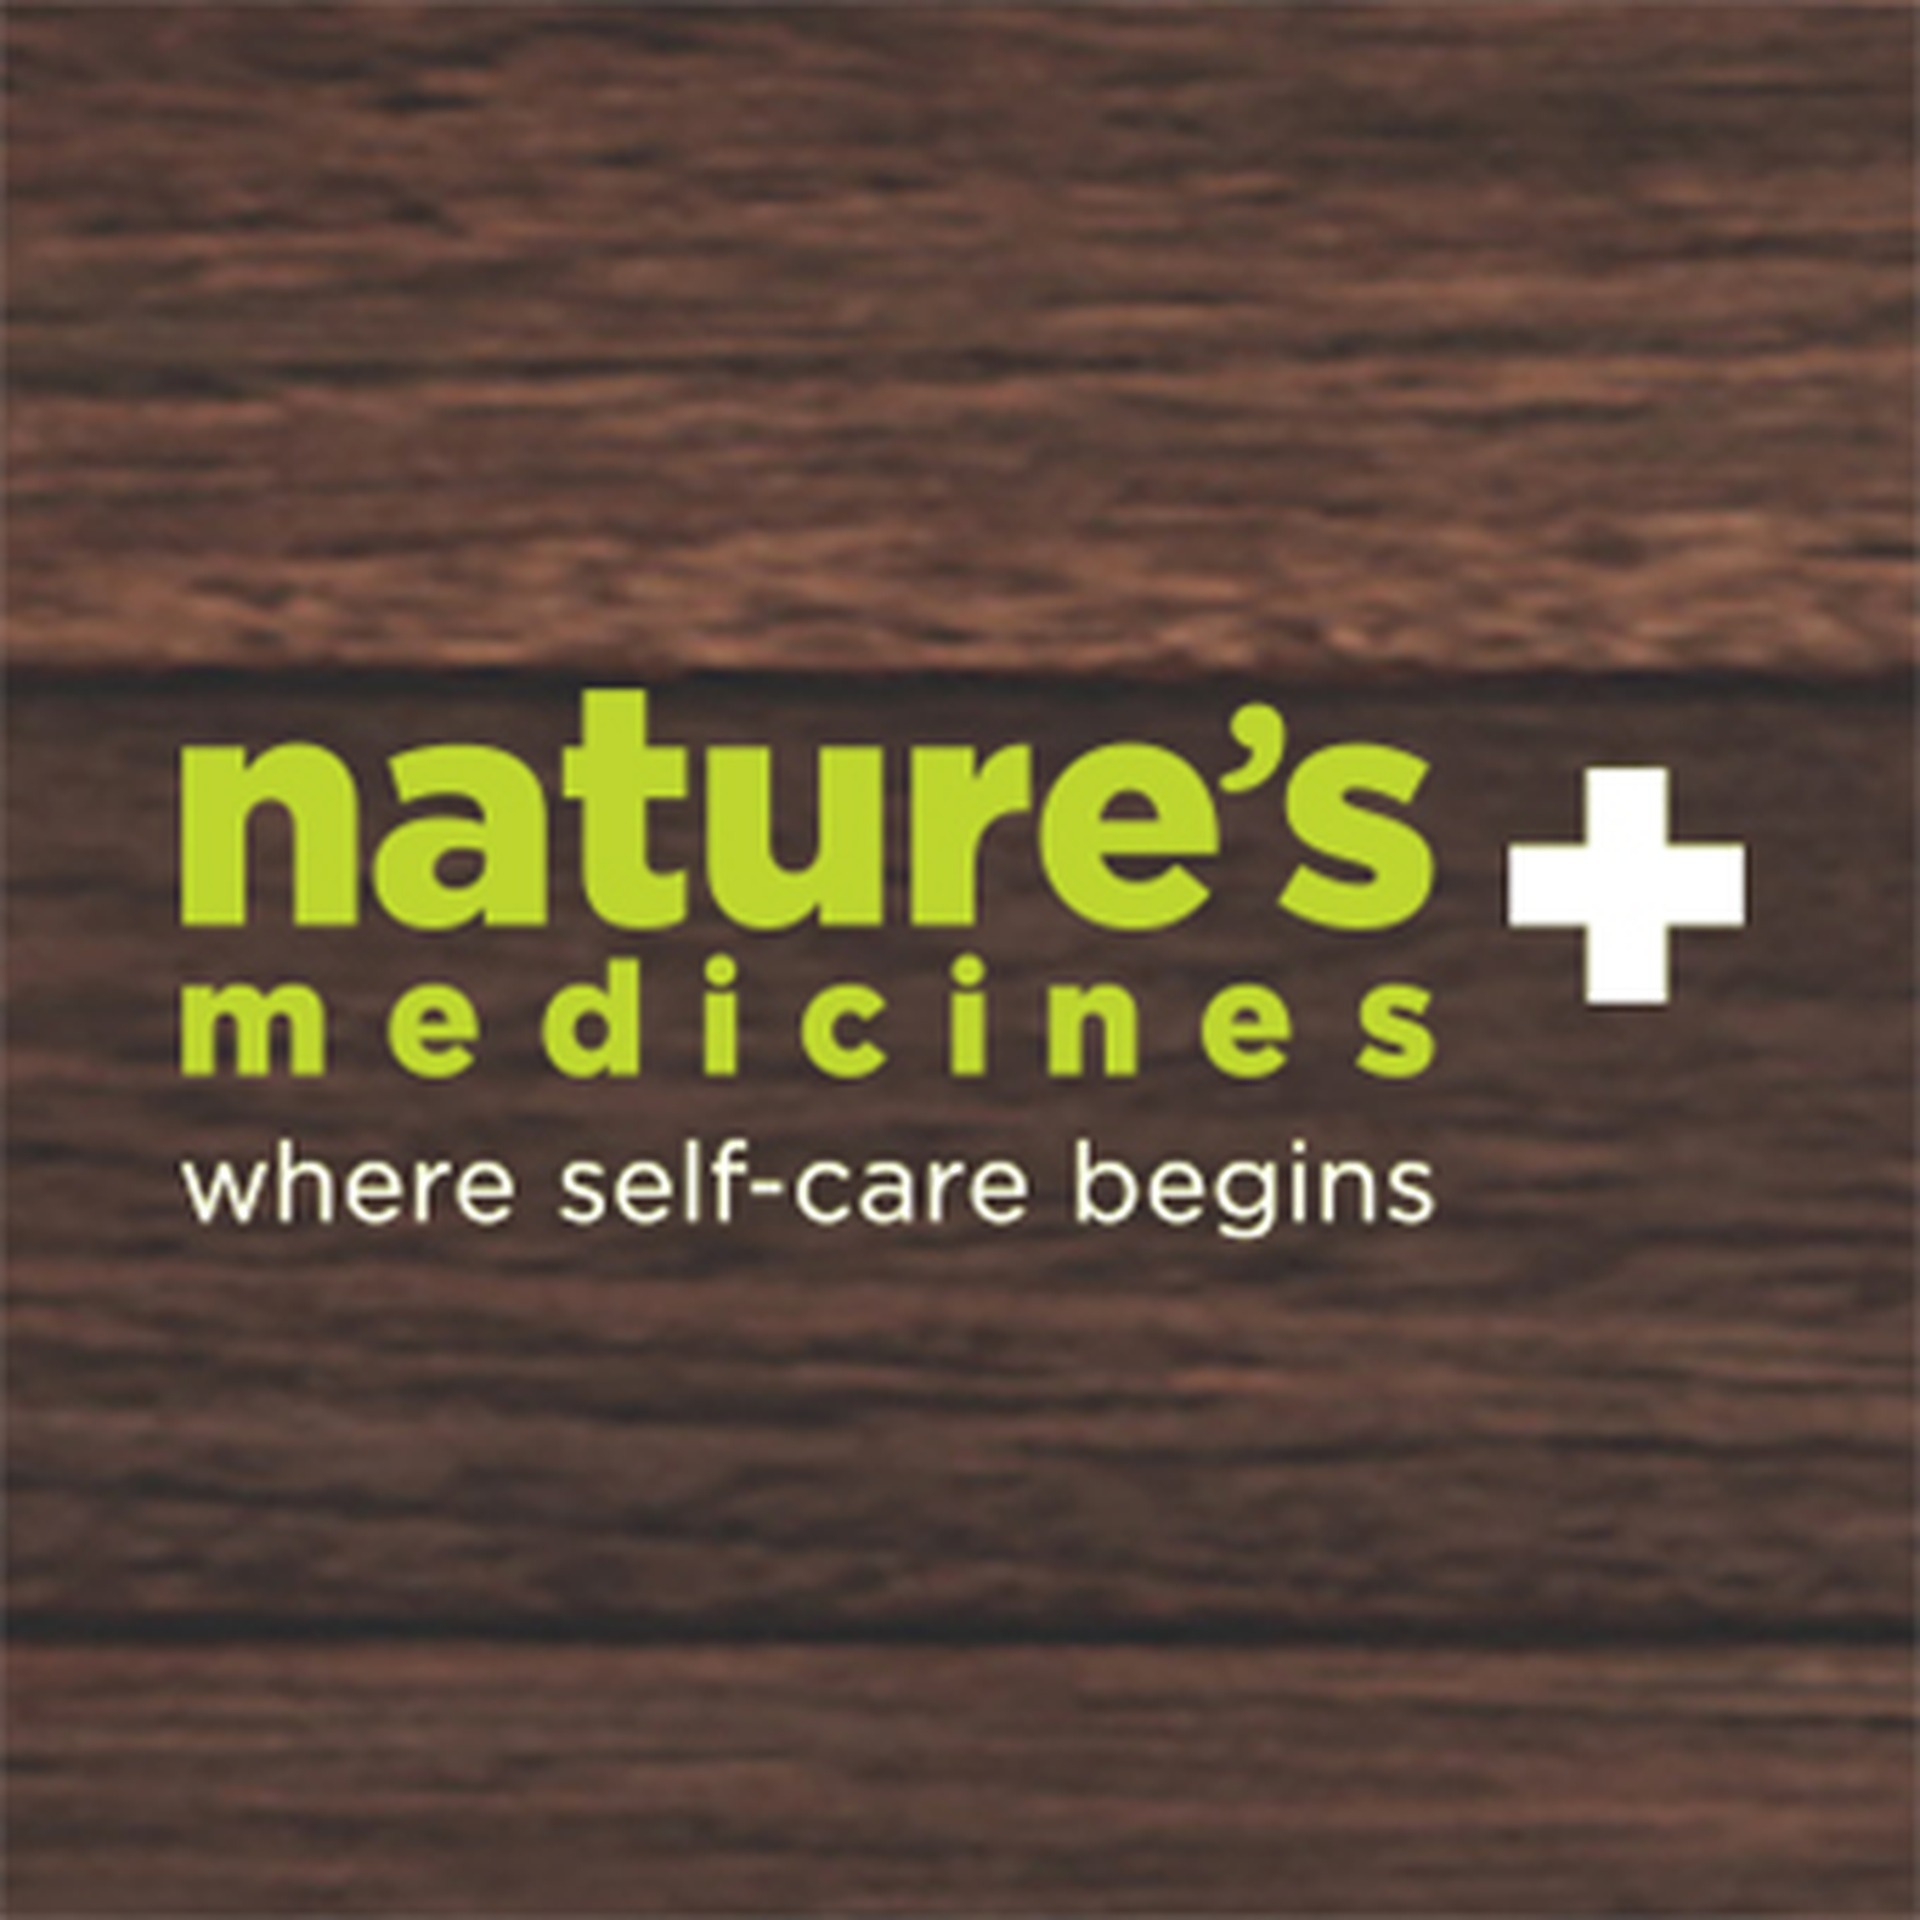 Nature's Medicines Selinsgrove Selinsgrove, PA Dispensary Leafly